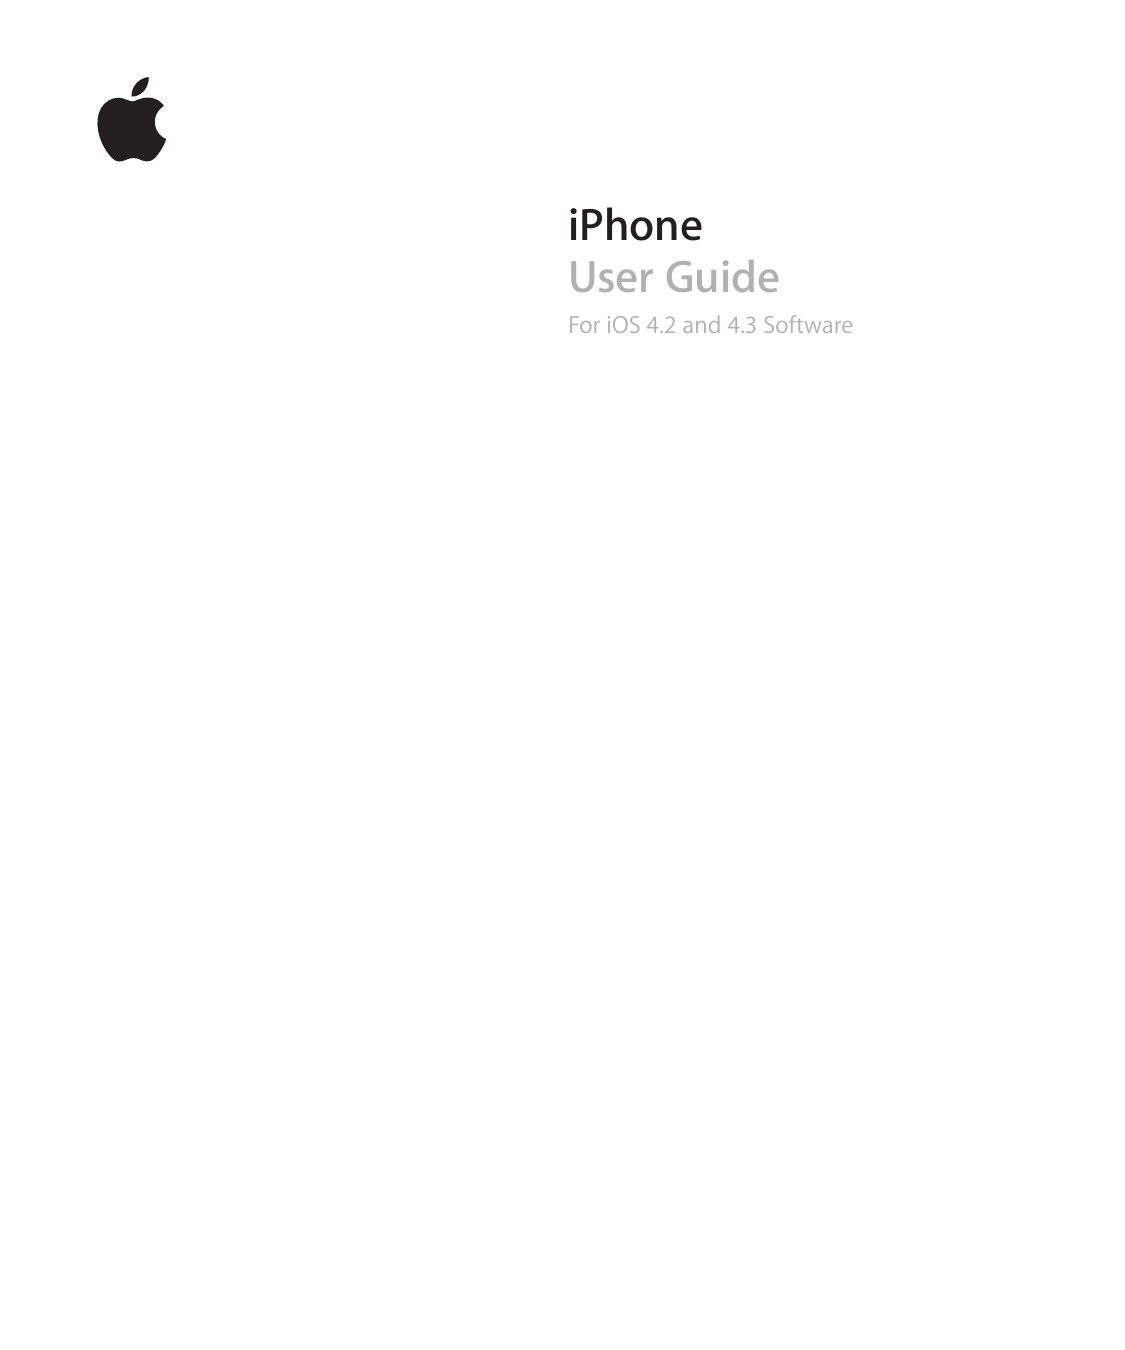 iPhoneUser GuideFor iOS 4.2 and 4.3 Software